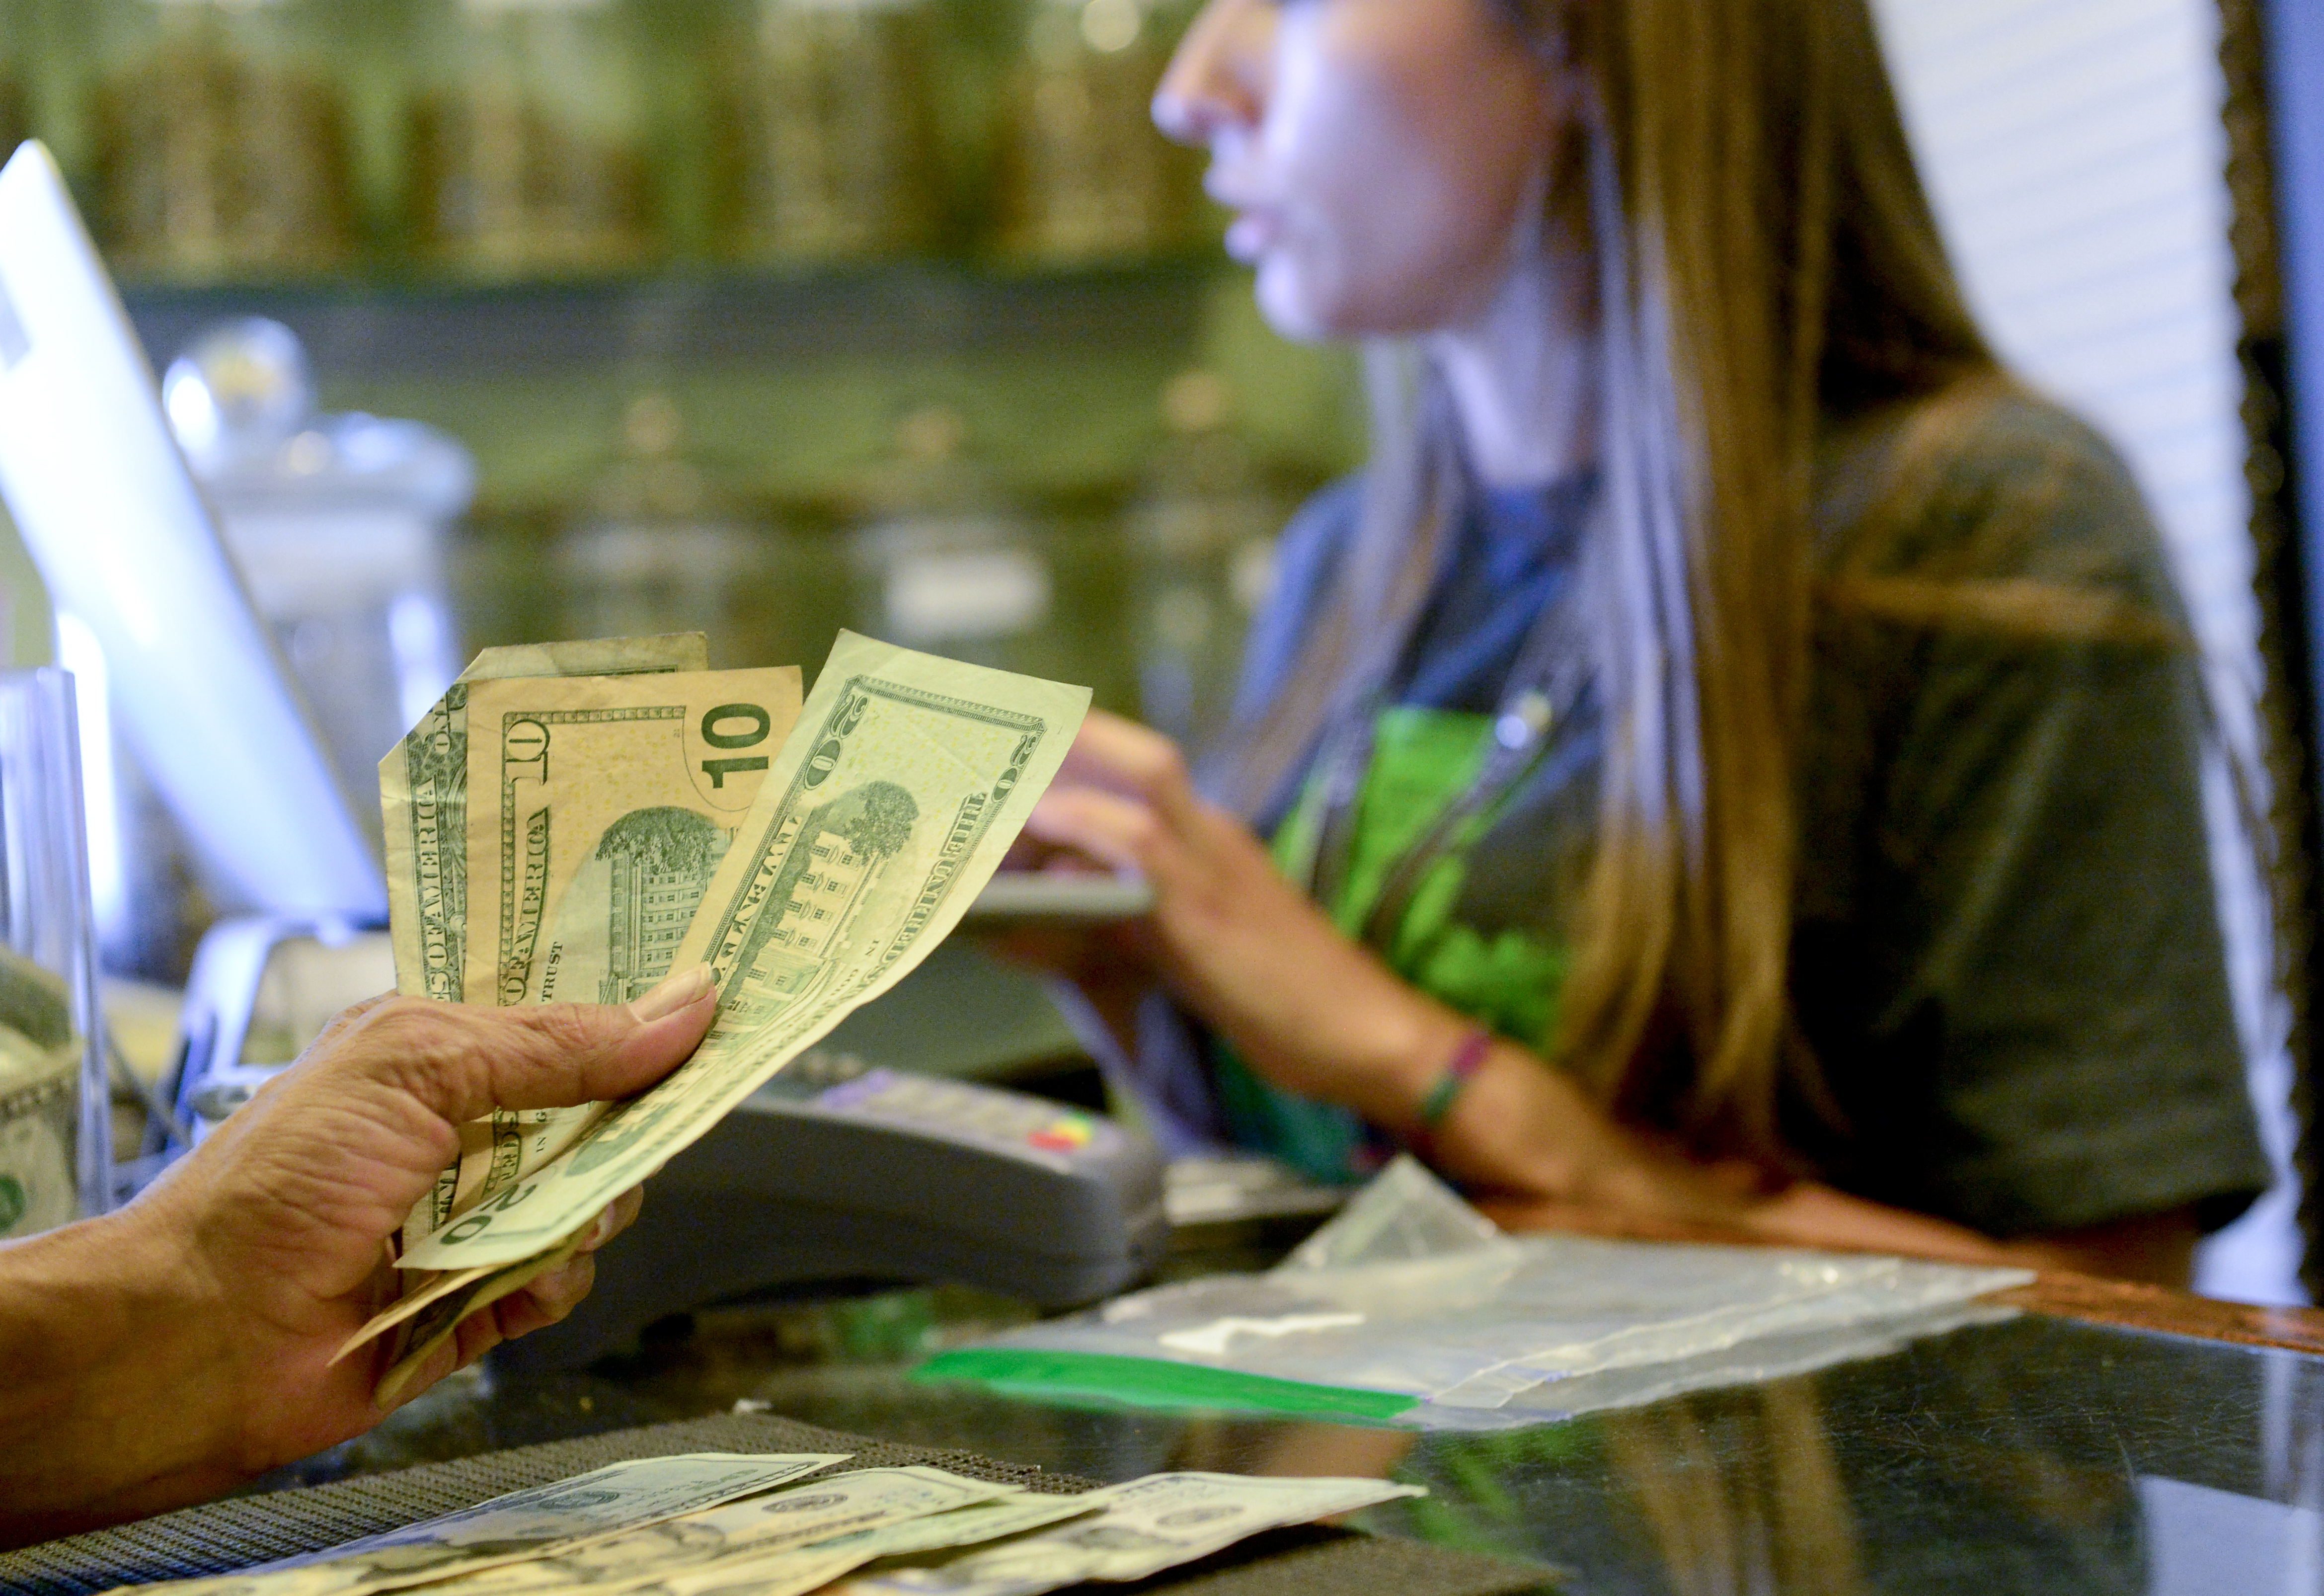 Colorado is using pot tax money to save programs funded by big tobacco settlement